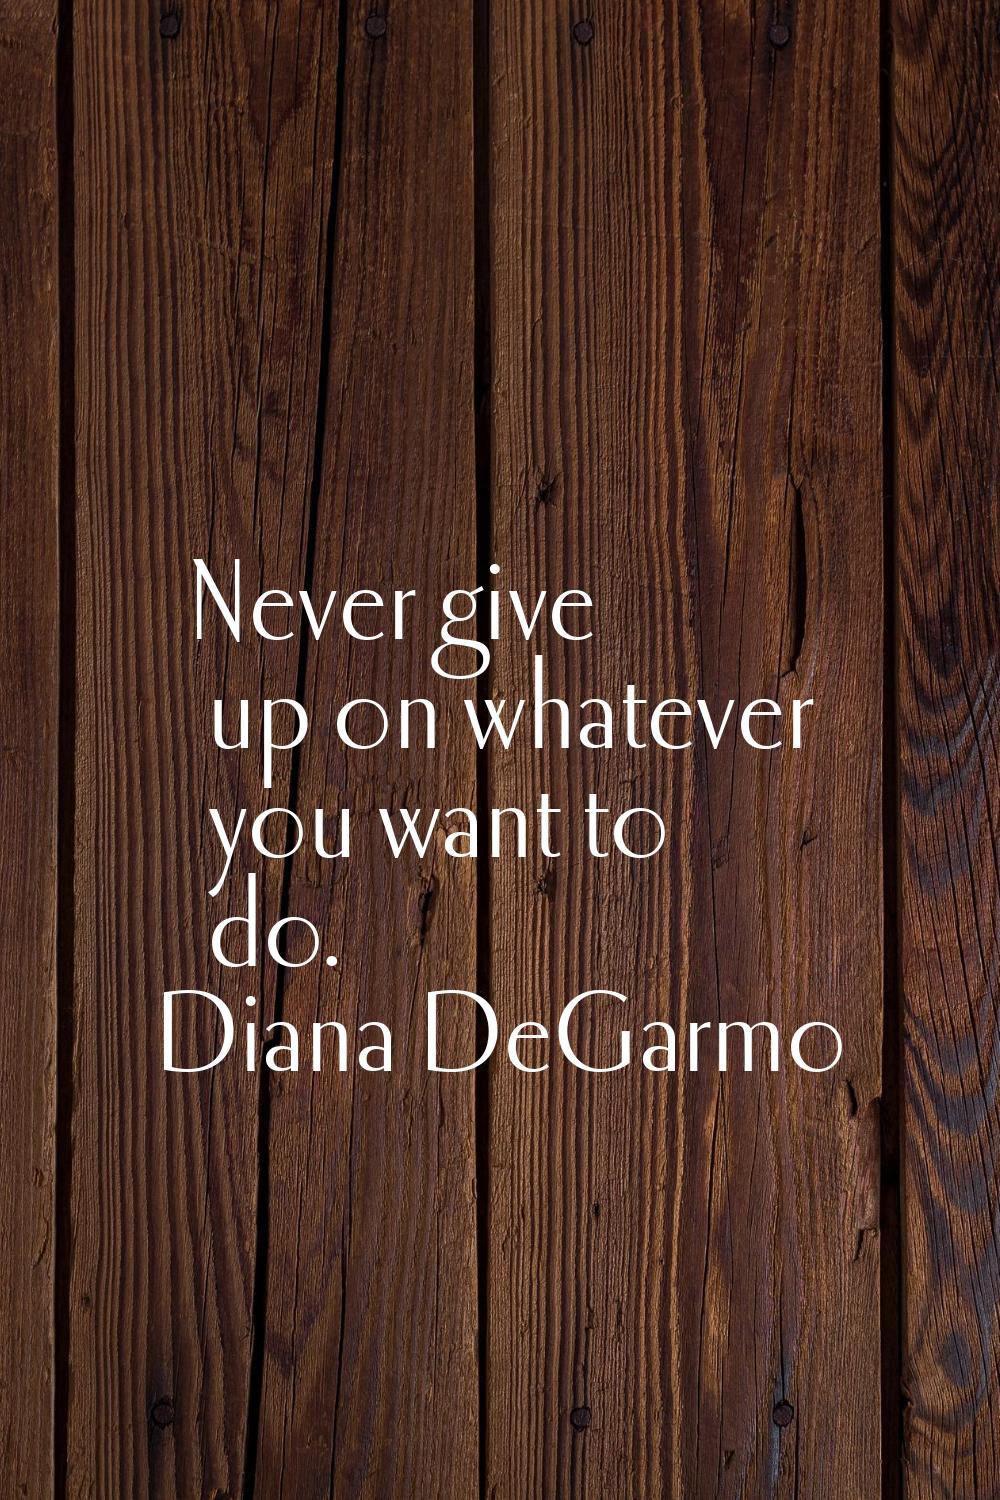 Never give up on whatever you want to do.